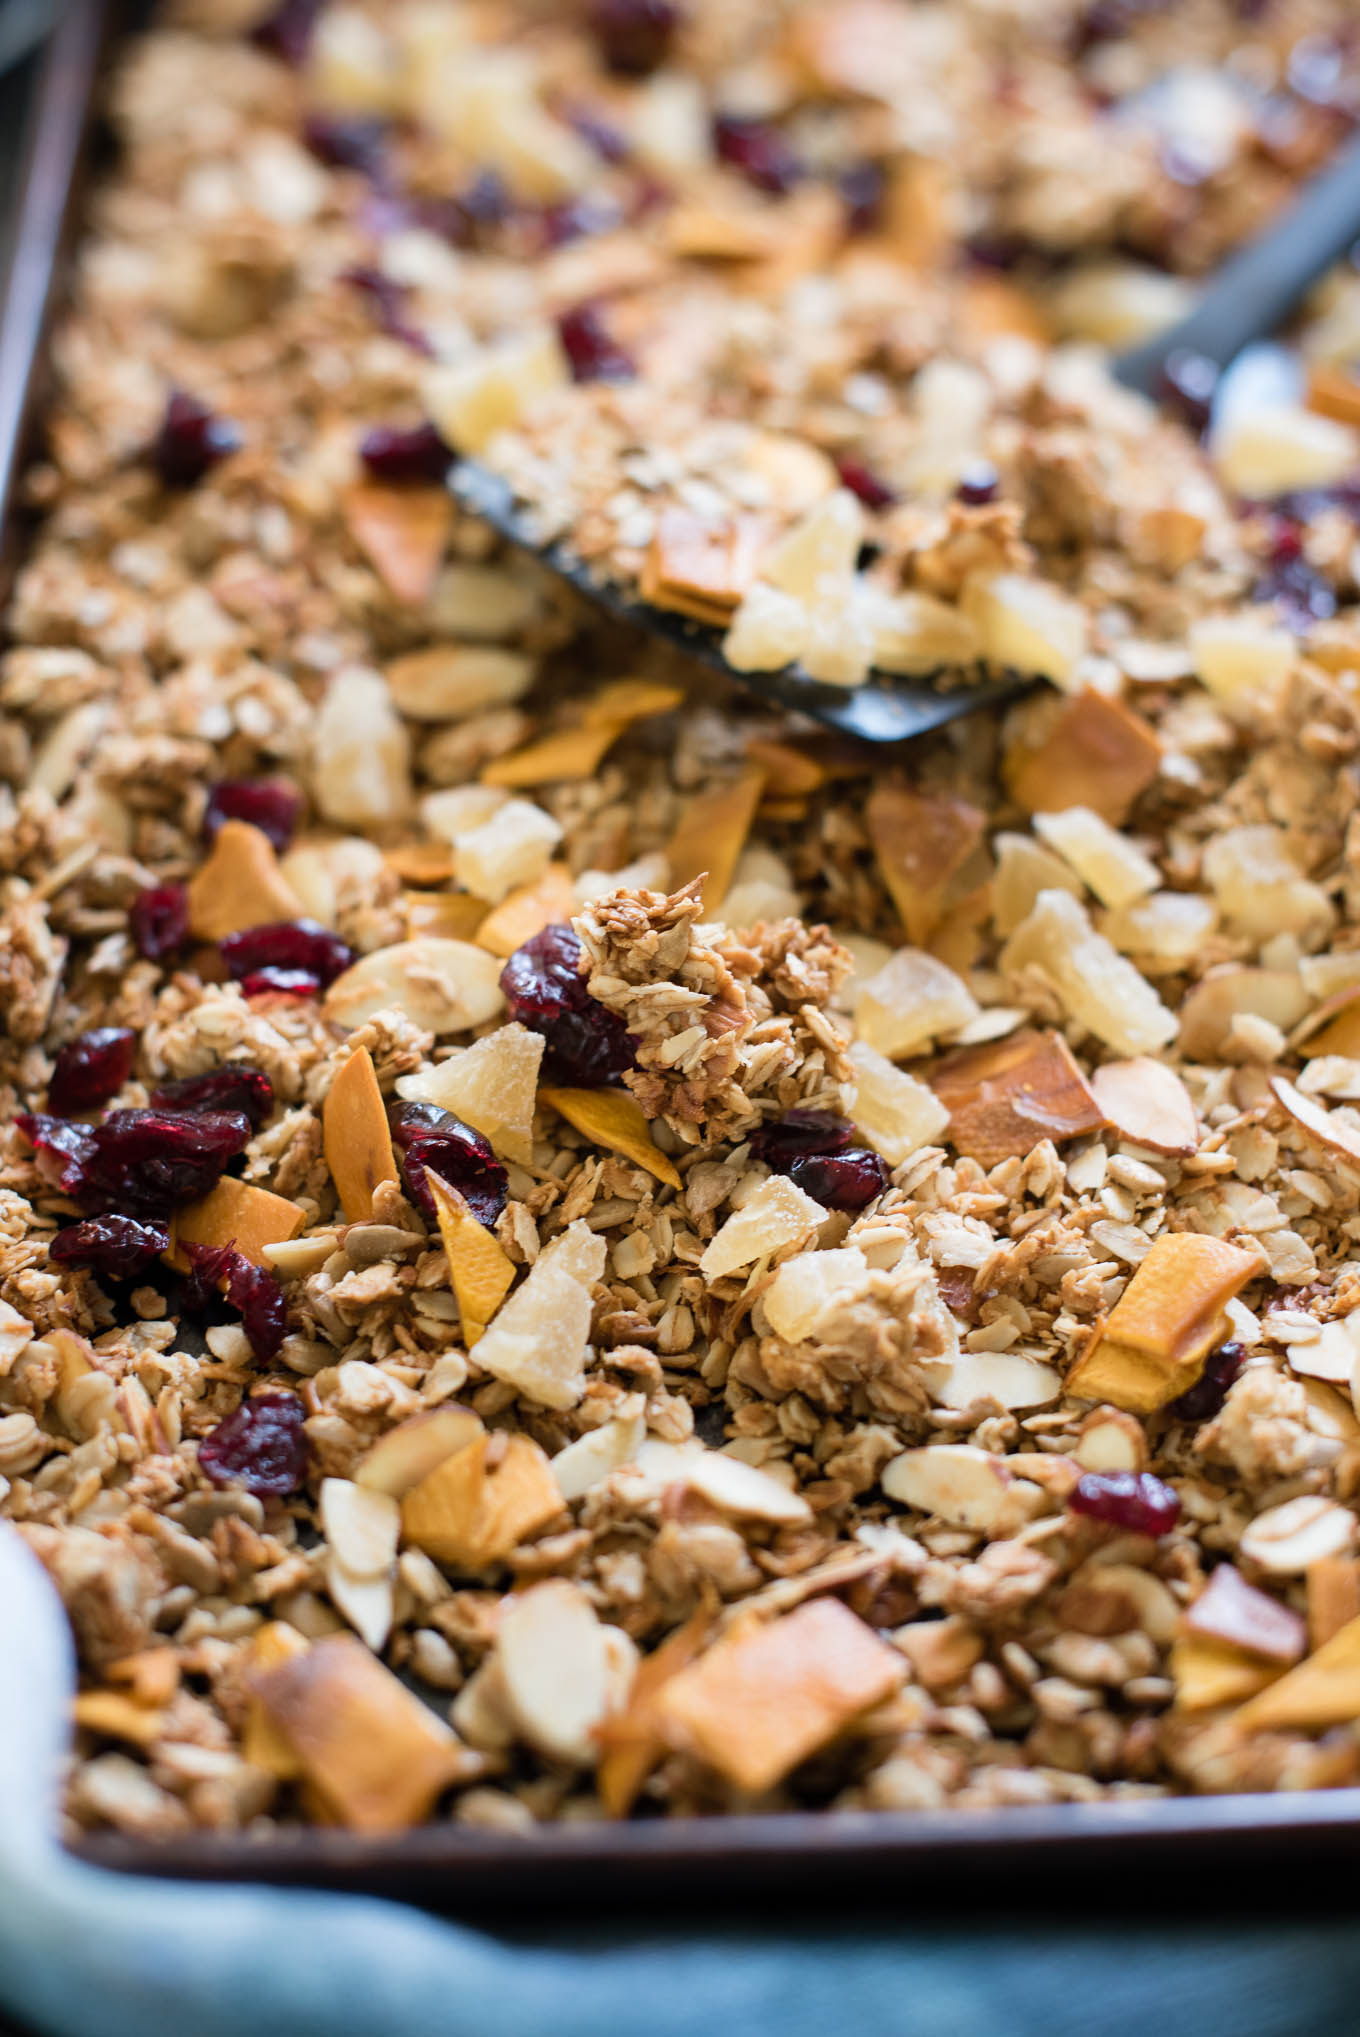 Serve this Easy Homemade Granola with milk, over Greek yogurt or straight from the tin for a healthy breakfast or snack! Made with rolled oats, coconut, seeds, nuts and fruit- the perfect combo! 